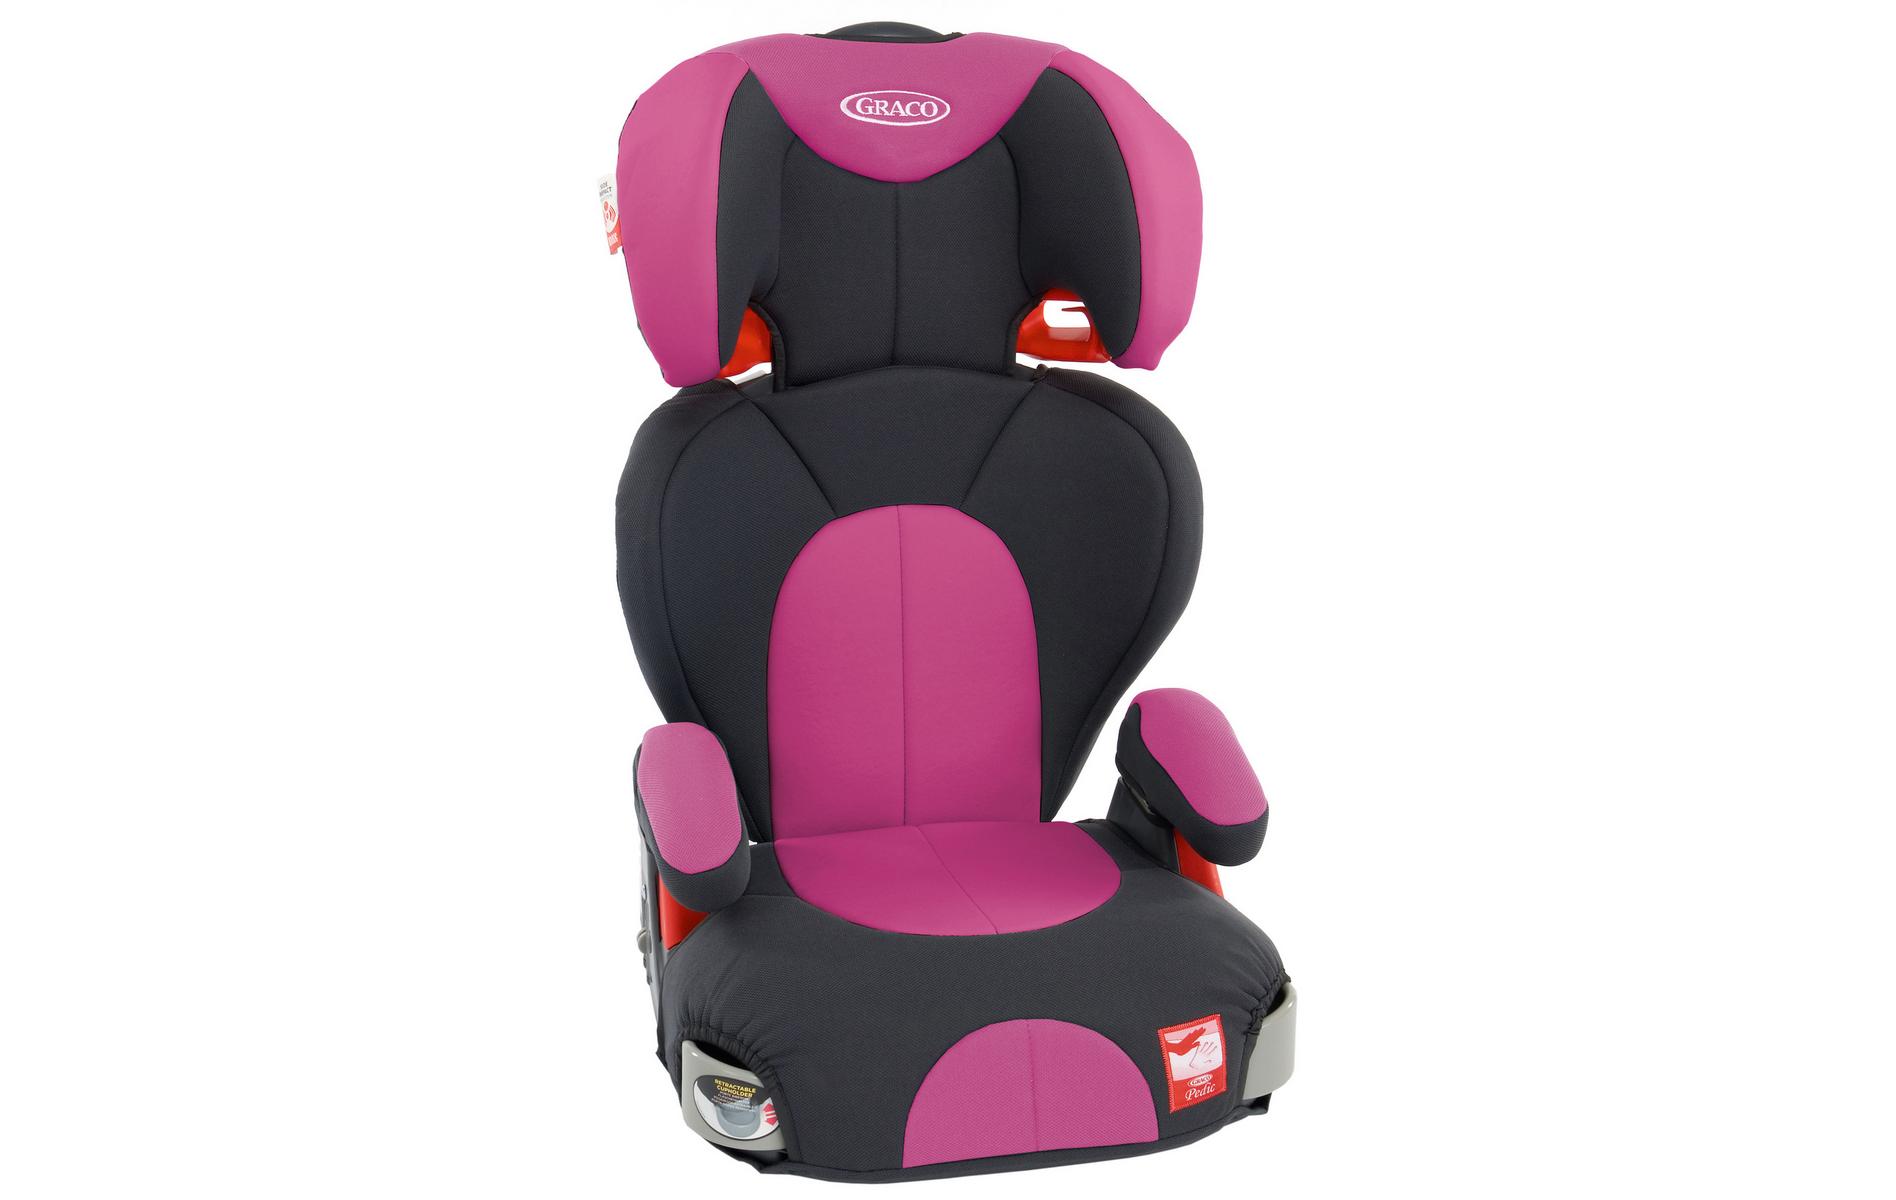 Graco Logico L Sport High Back Booster Seat - Pink